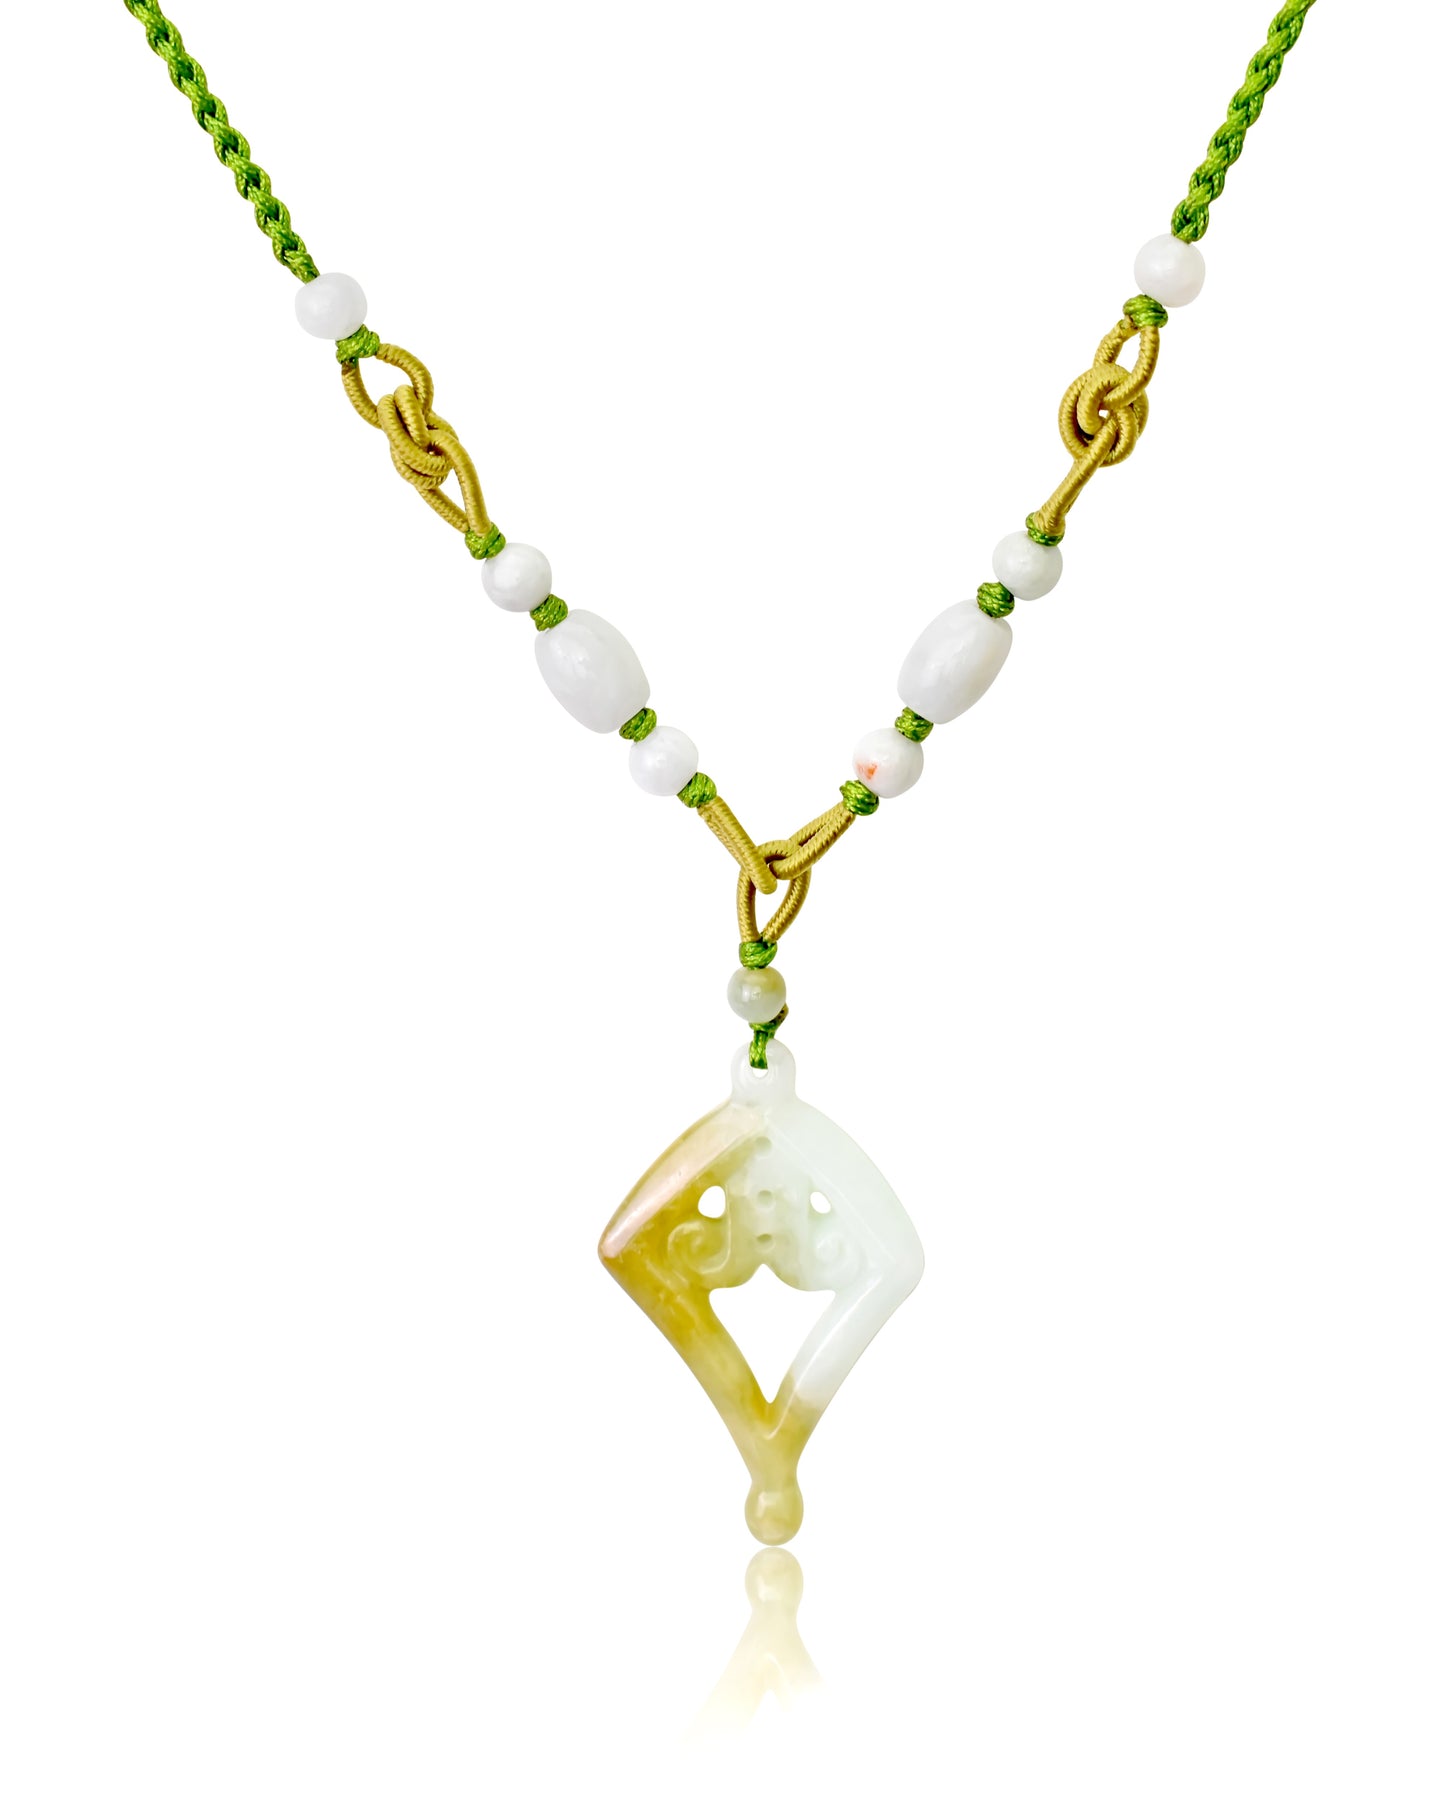 Be Uniquely You with Diamond and Lace Jade Necklace Pendant made with Lime Cord